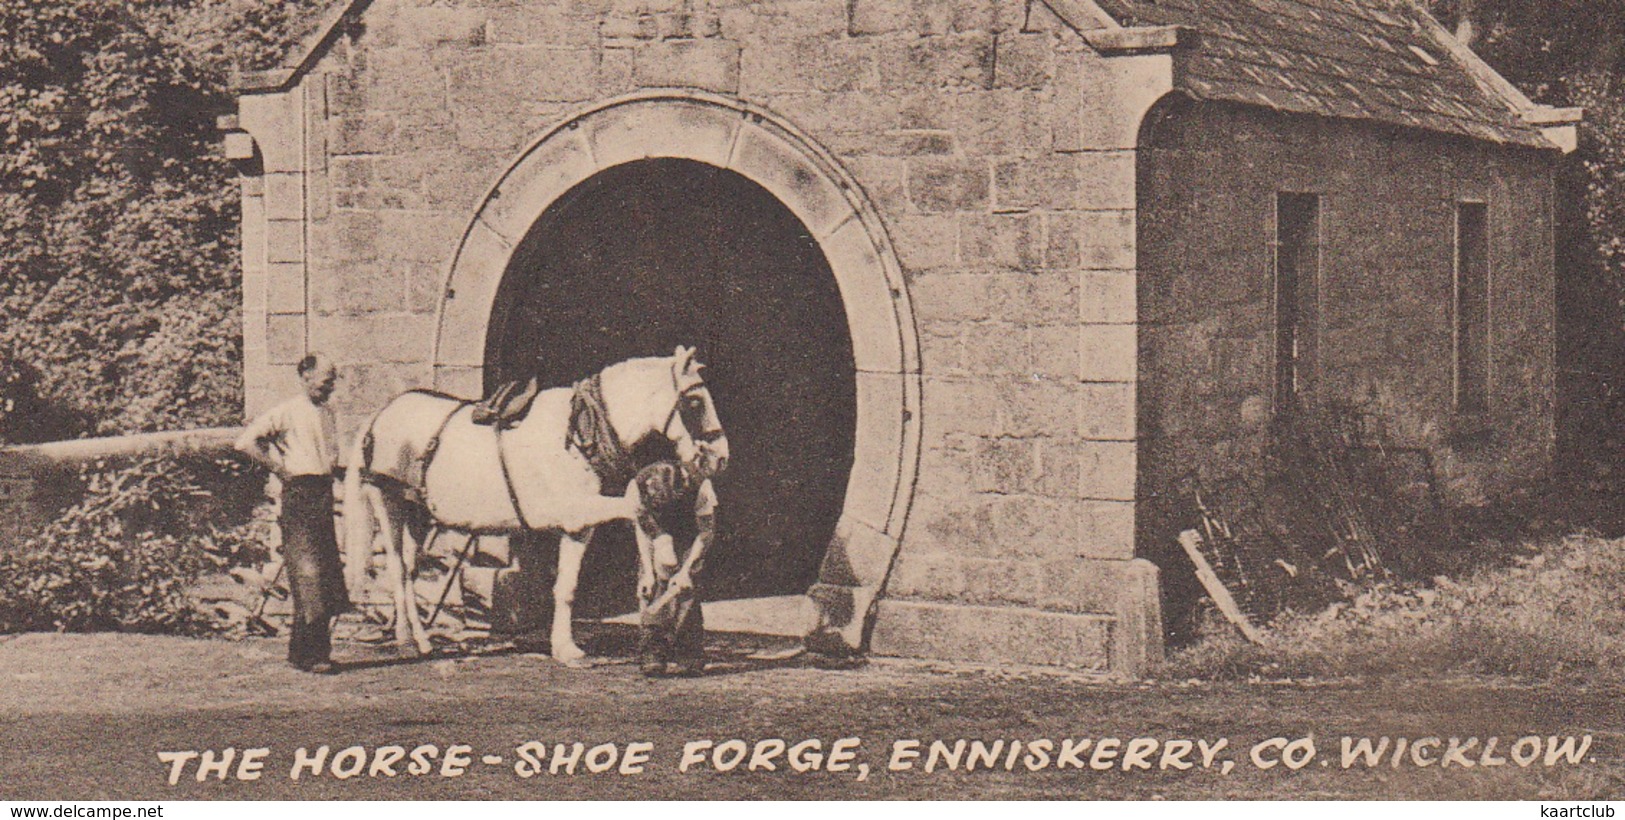 The Horse-Shoe Forge, Enniskerry, Co. Wicklow - (Ireland) - Wicklow